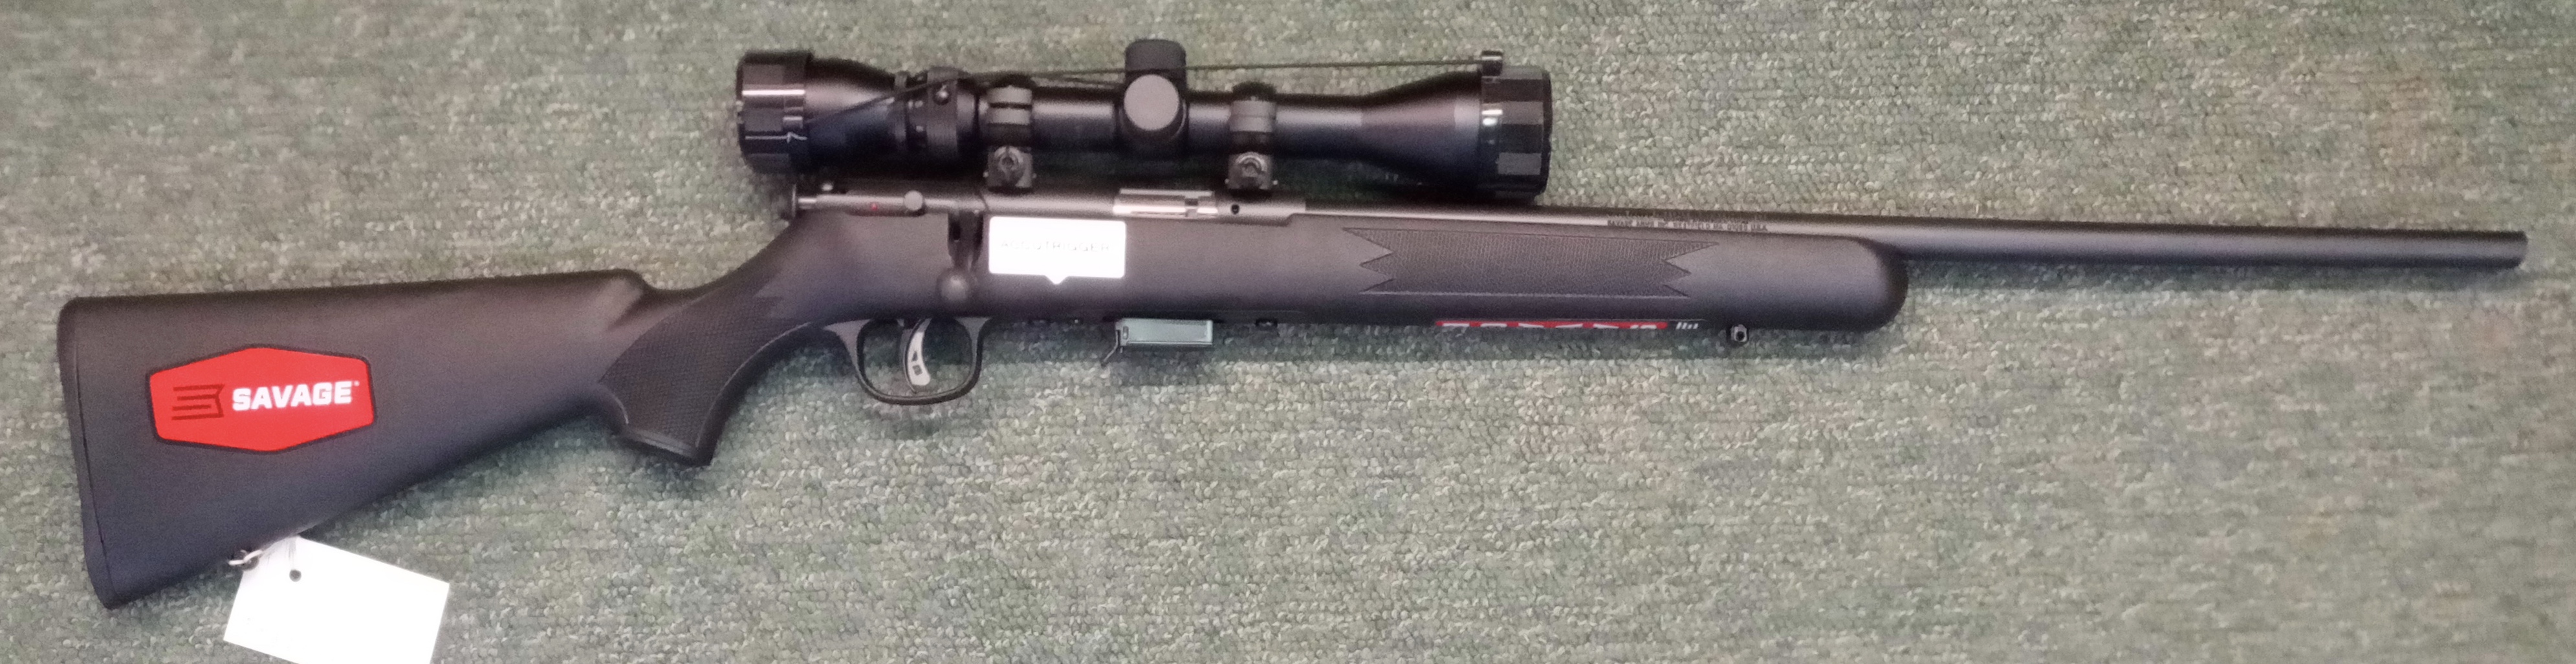 Savage 93 FNSXP .22 Mag. Scope Combo